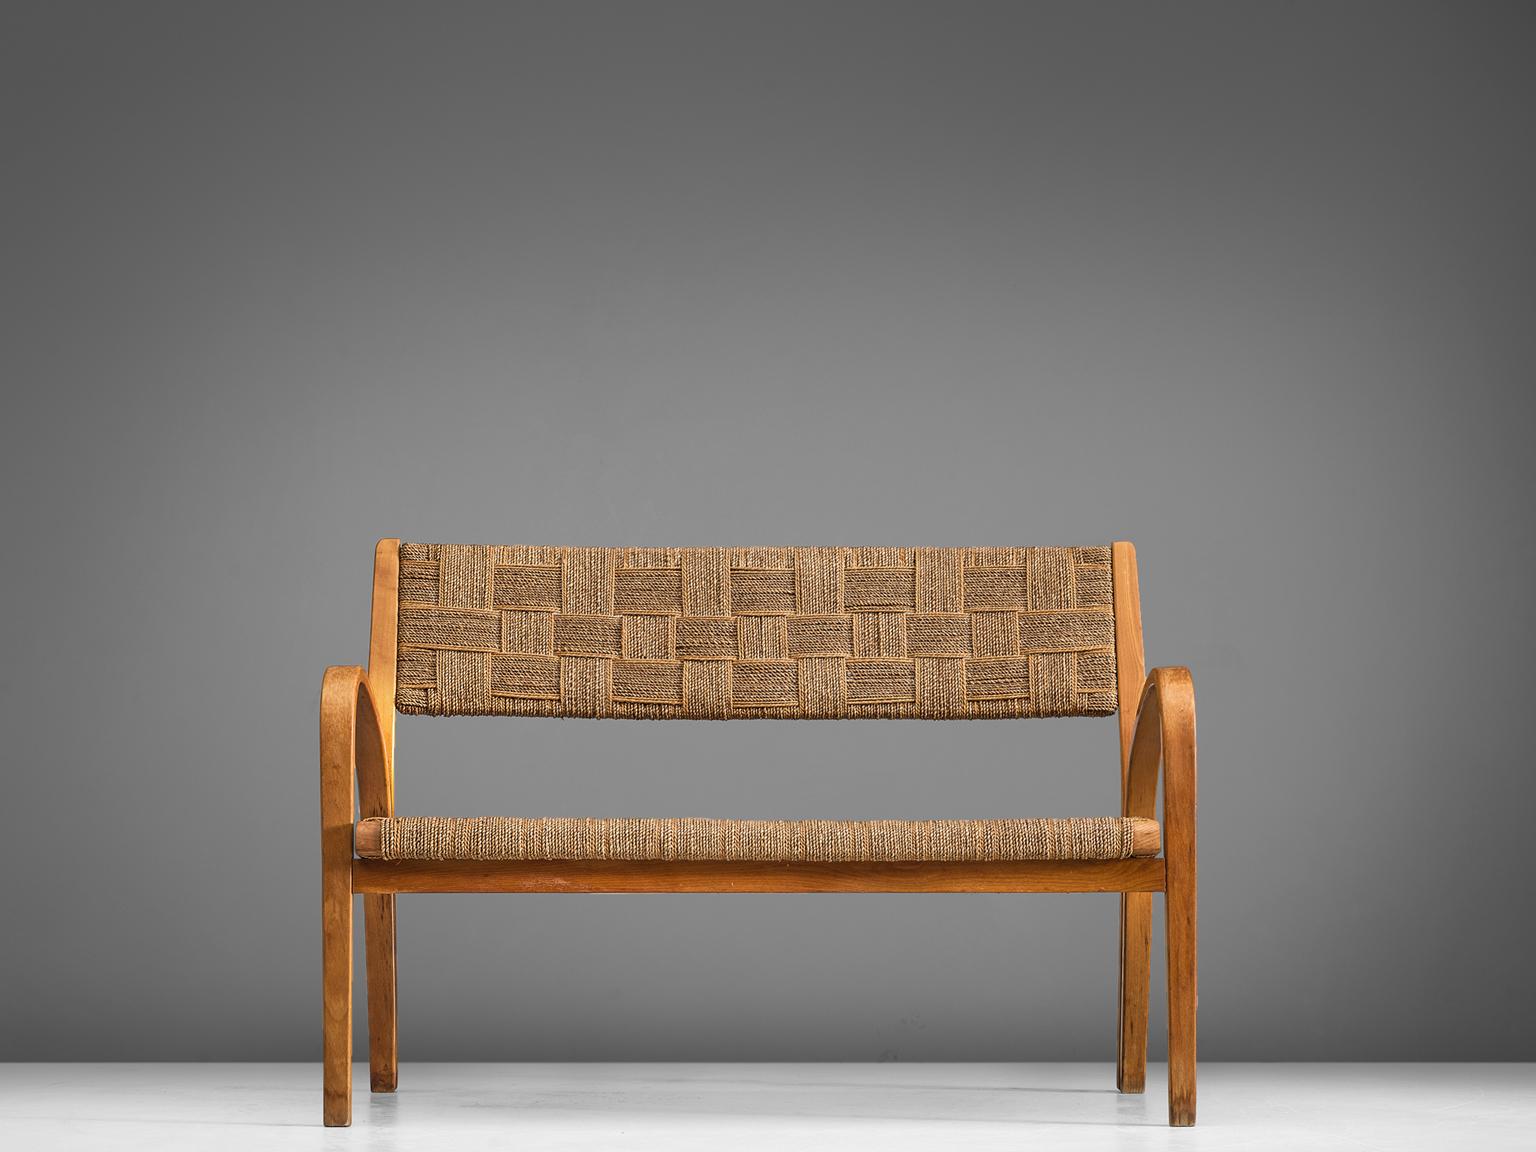 Sofa attributed to Giuseppe Pagano, curved wooden structure coated rope, Italy, 1940s.

This sofa is executed in wood and coated rope. The design of this Italian sofa is Minimalist yet not in a Puritan way. The armrests seem to rise upwards and